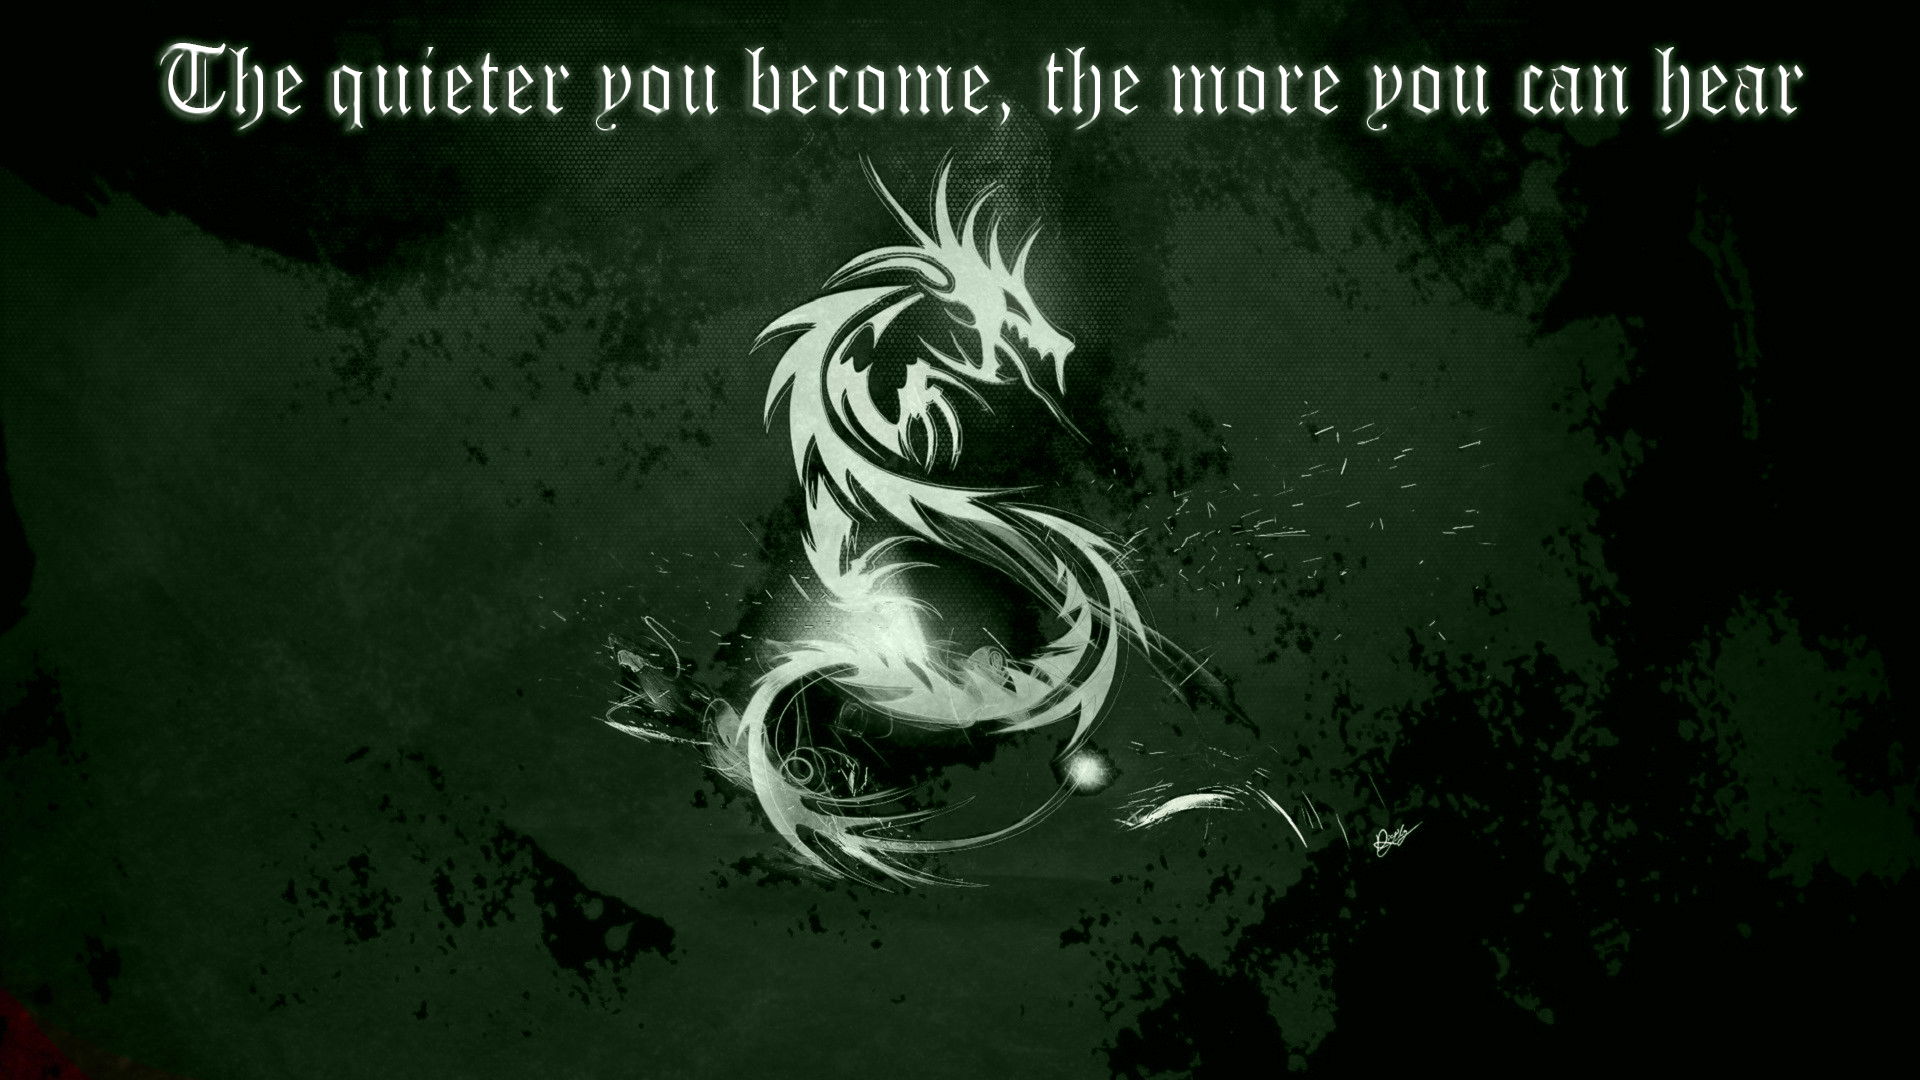 General 1920x1080 quote typography dragon abstract Kali Linux NetHunter hacking